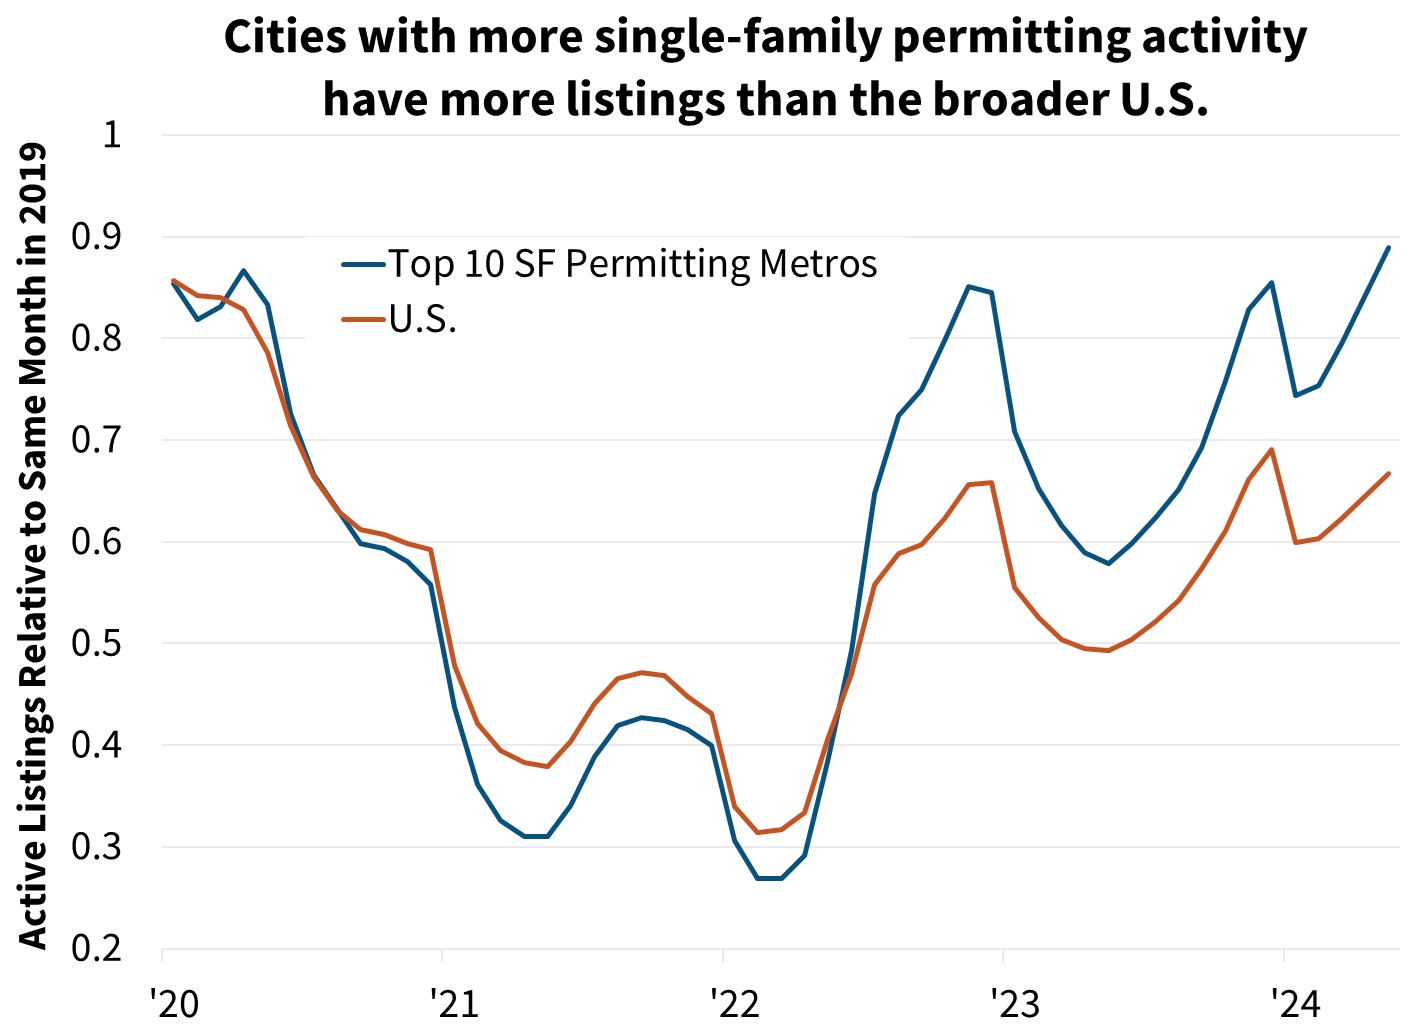 Cities with more single-family permitting activity have more listings than the broader U.S.